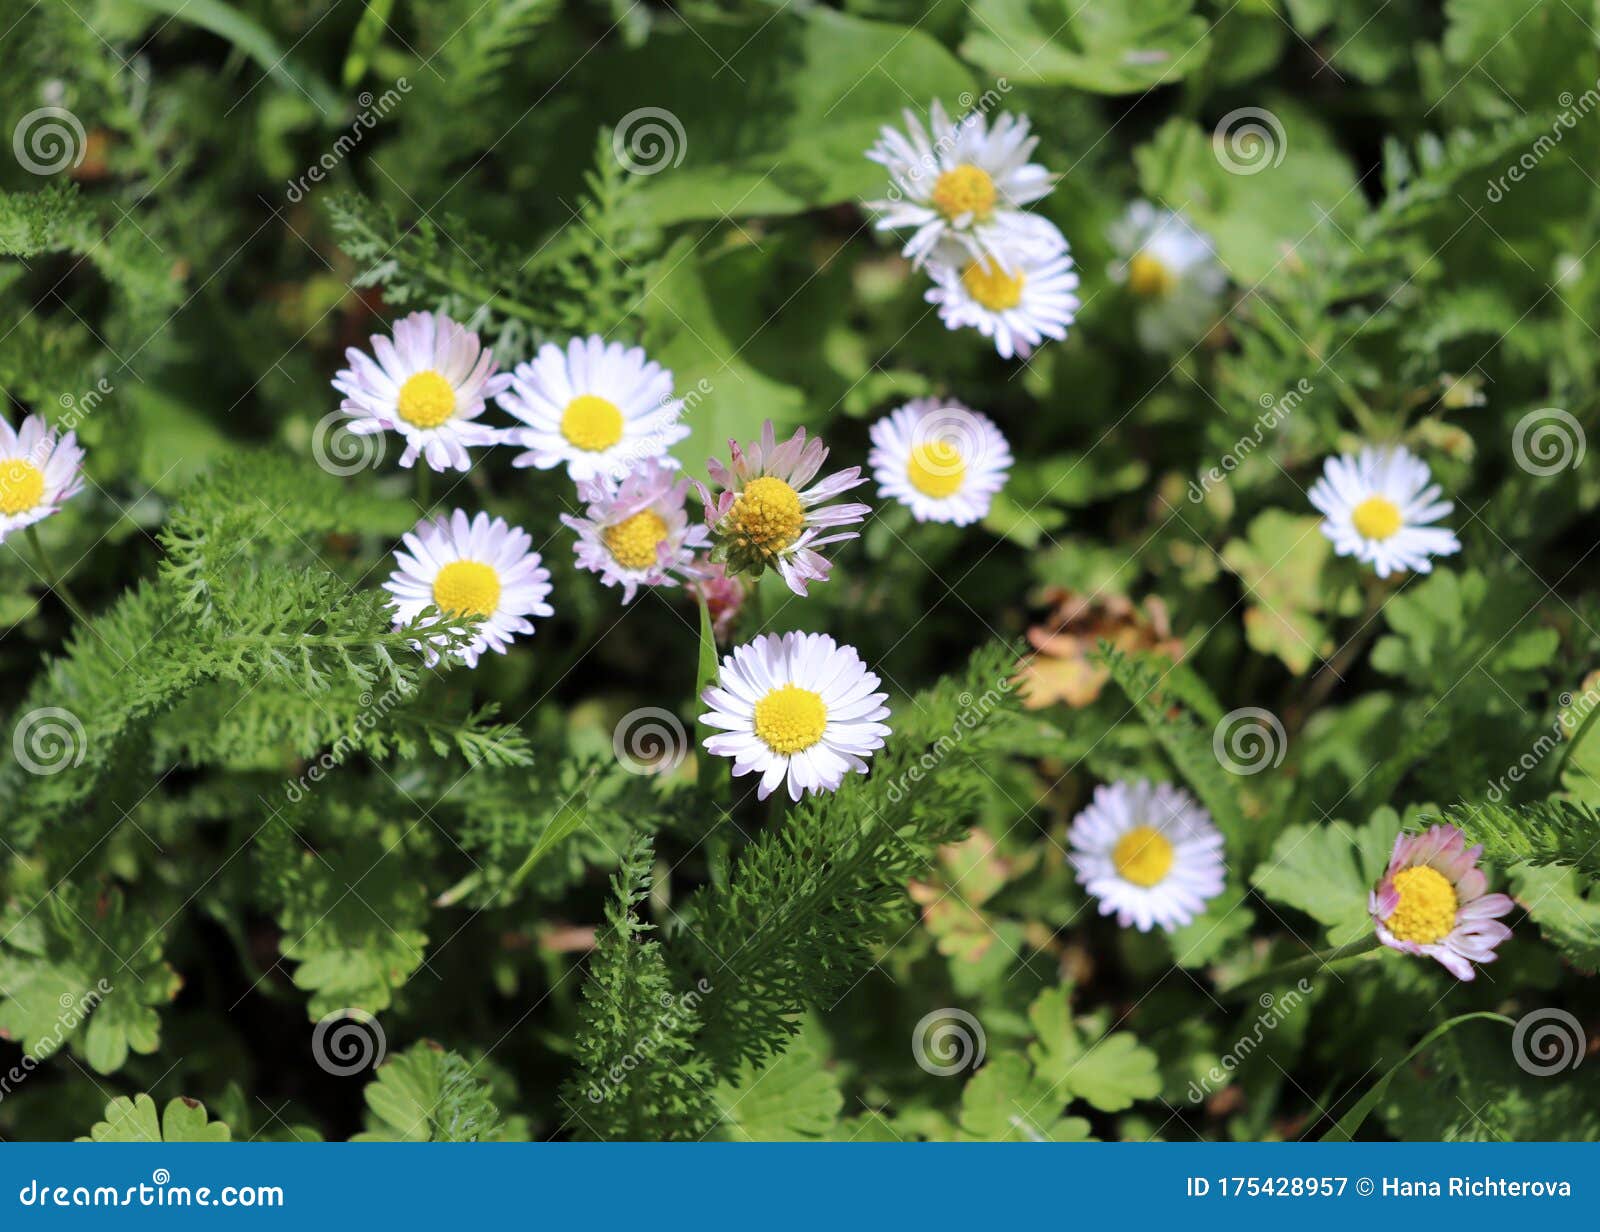 Wild Bellis Perennis Flowers In Meadow Bellis Is A Genus Of Flowering Plants In The Daisy Family The Genus Includes The Stock Image Image Of Botany Freshness